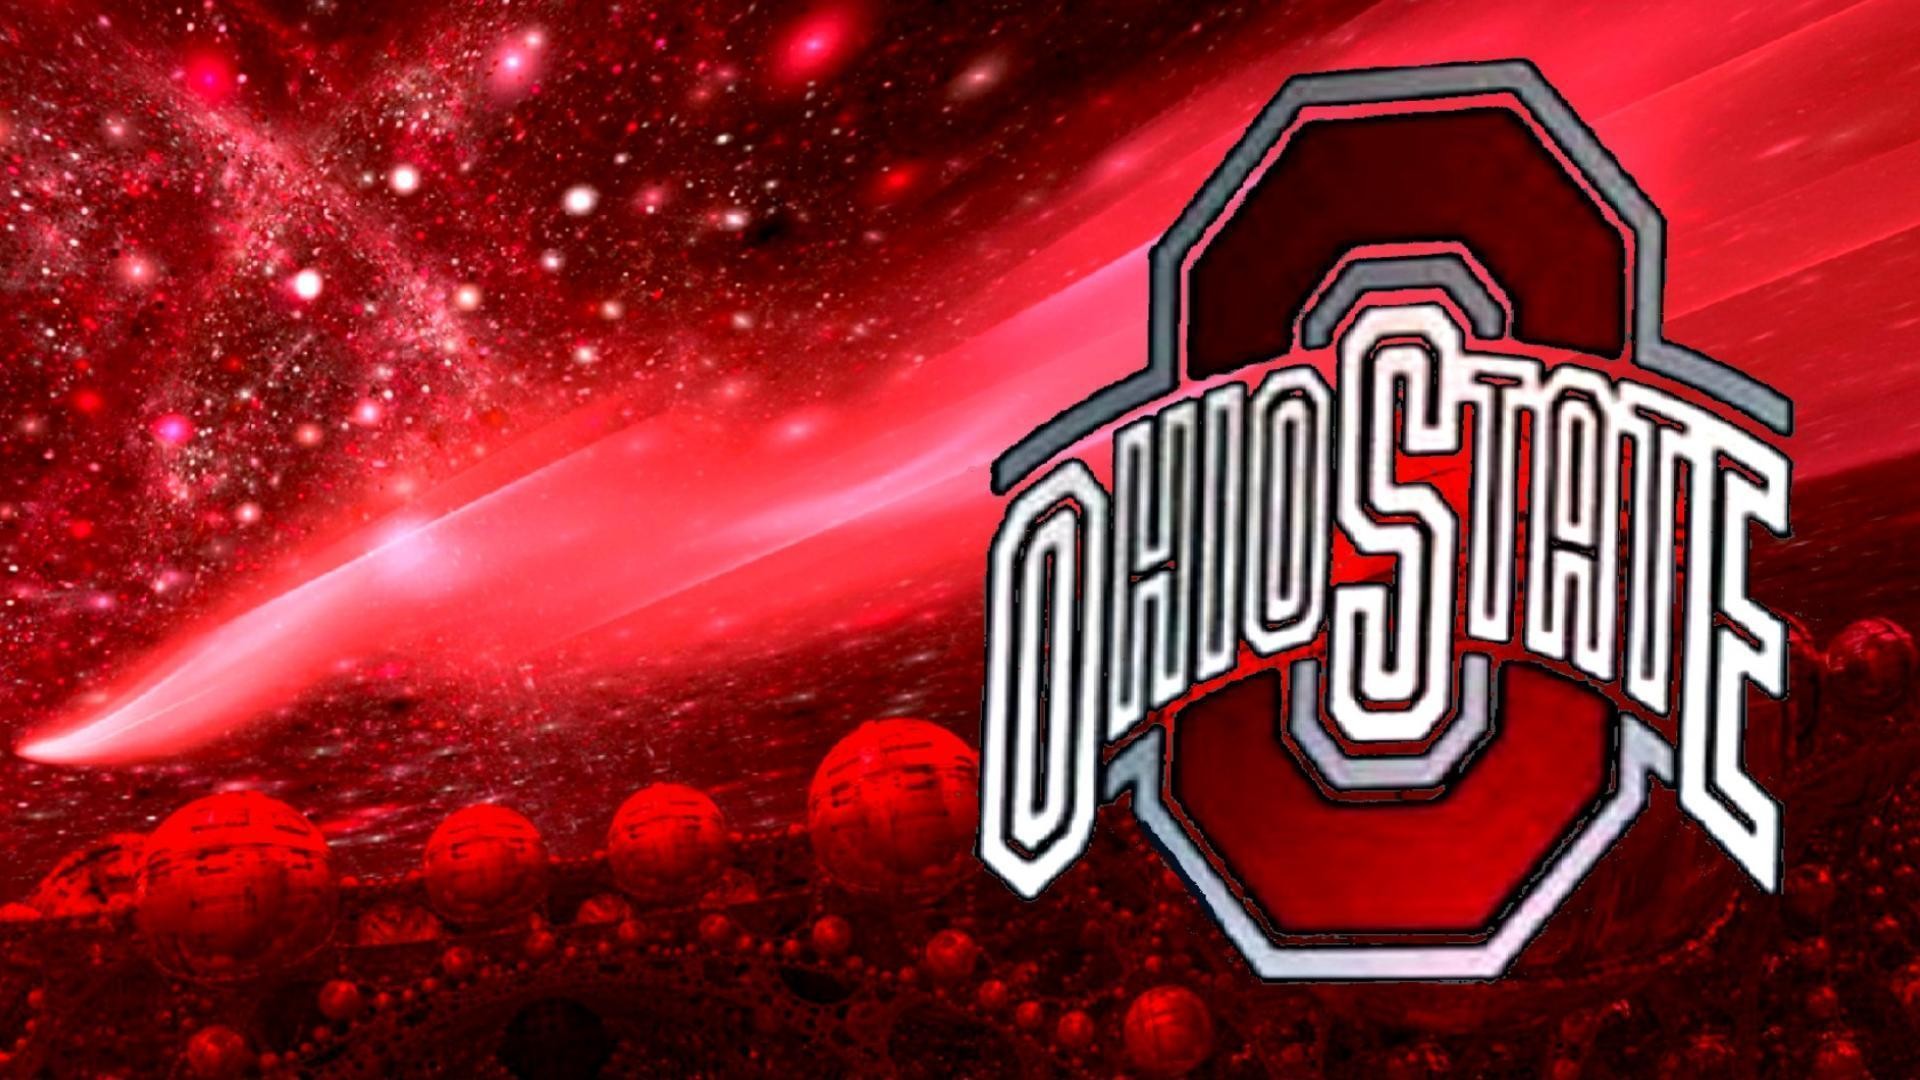 1920x1080 Ohio State Football Wallpapers - Wallpaper Cave